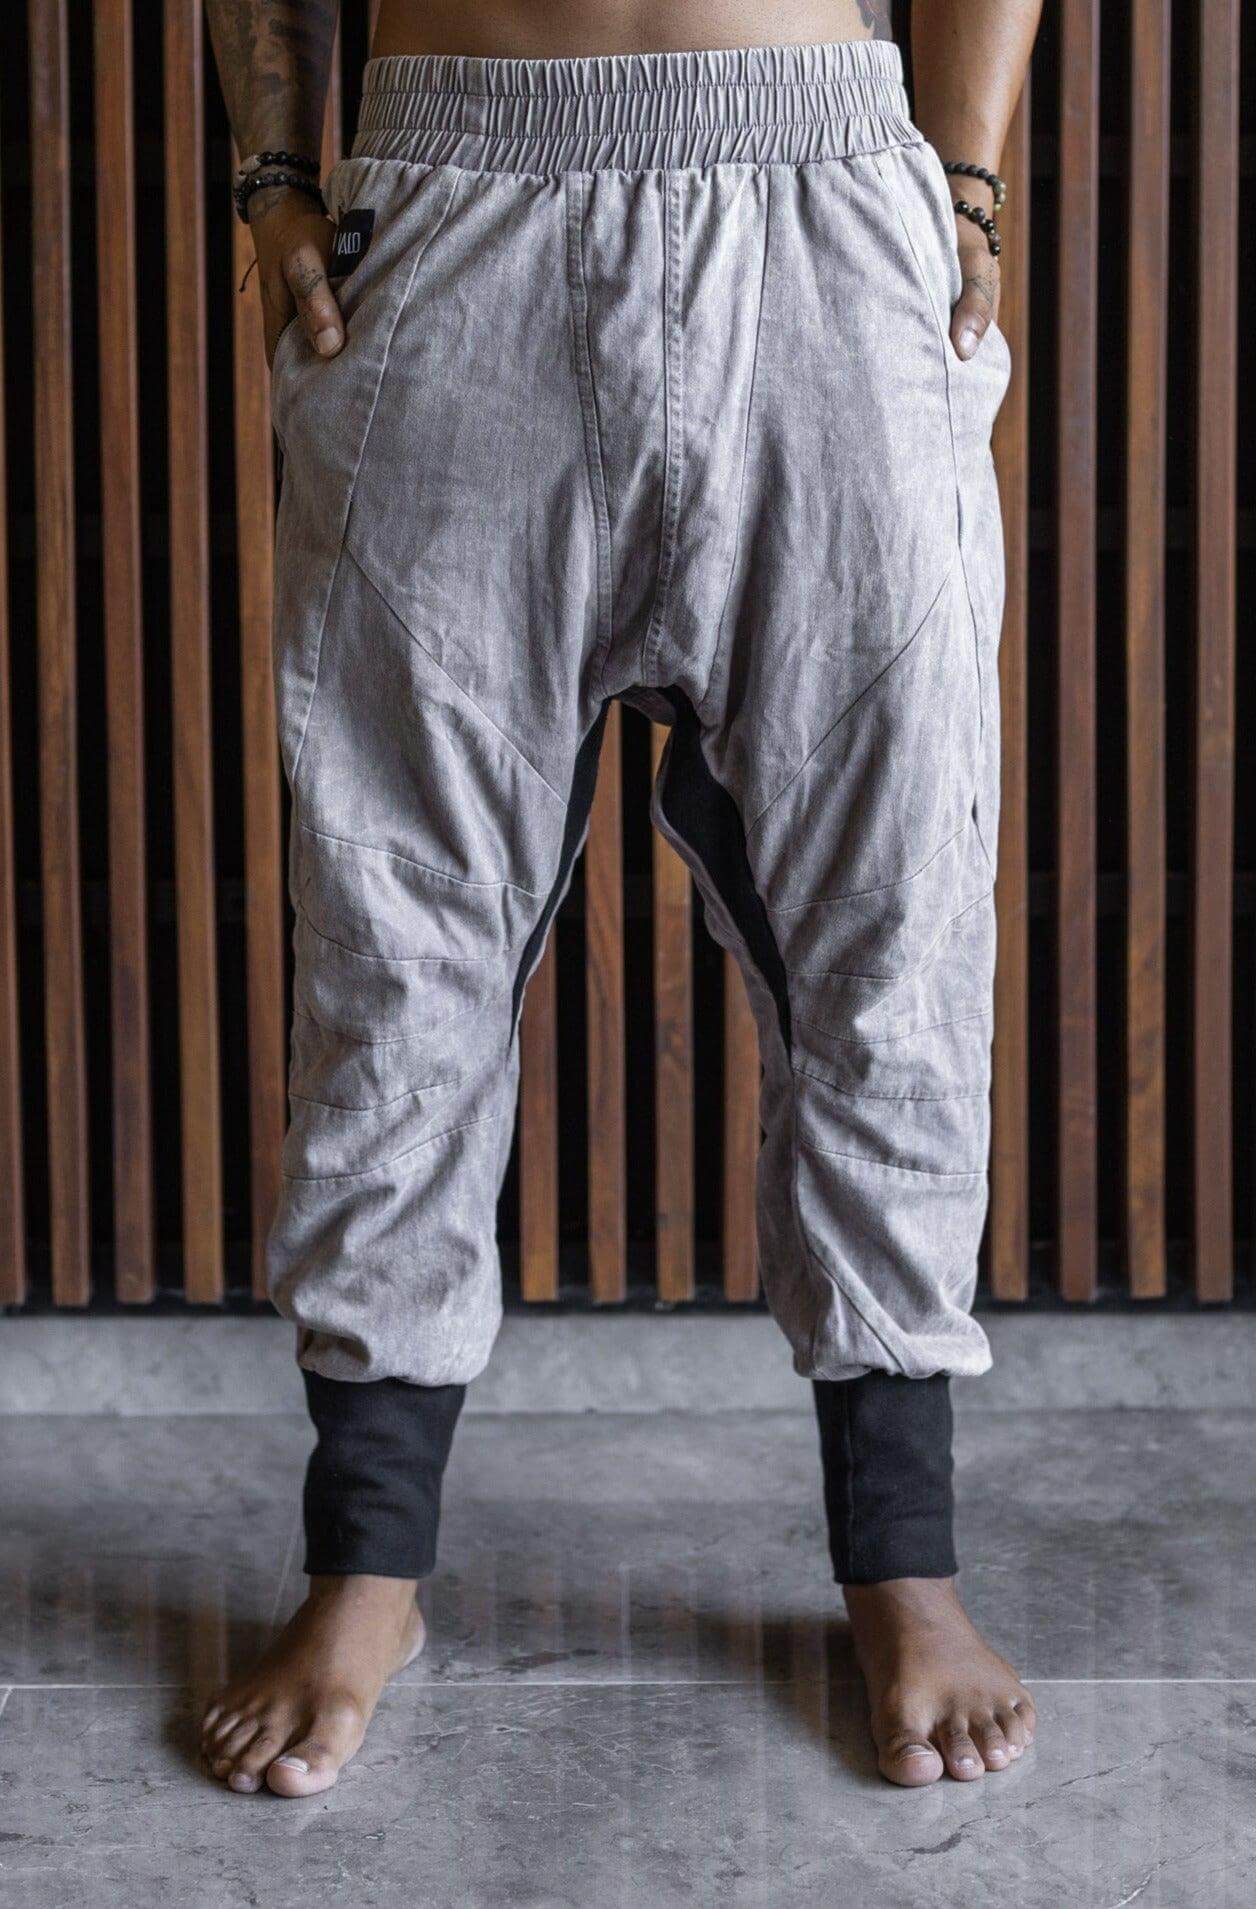 SISU Pants - Jogger style denim pants with two zipper pockets and drop crotch cut - VALO Design Clothing 